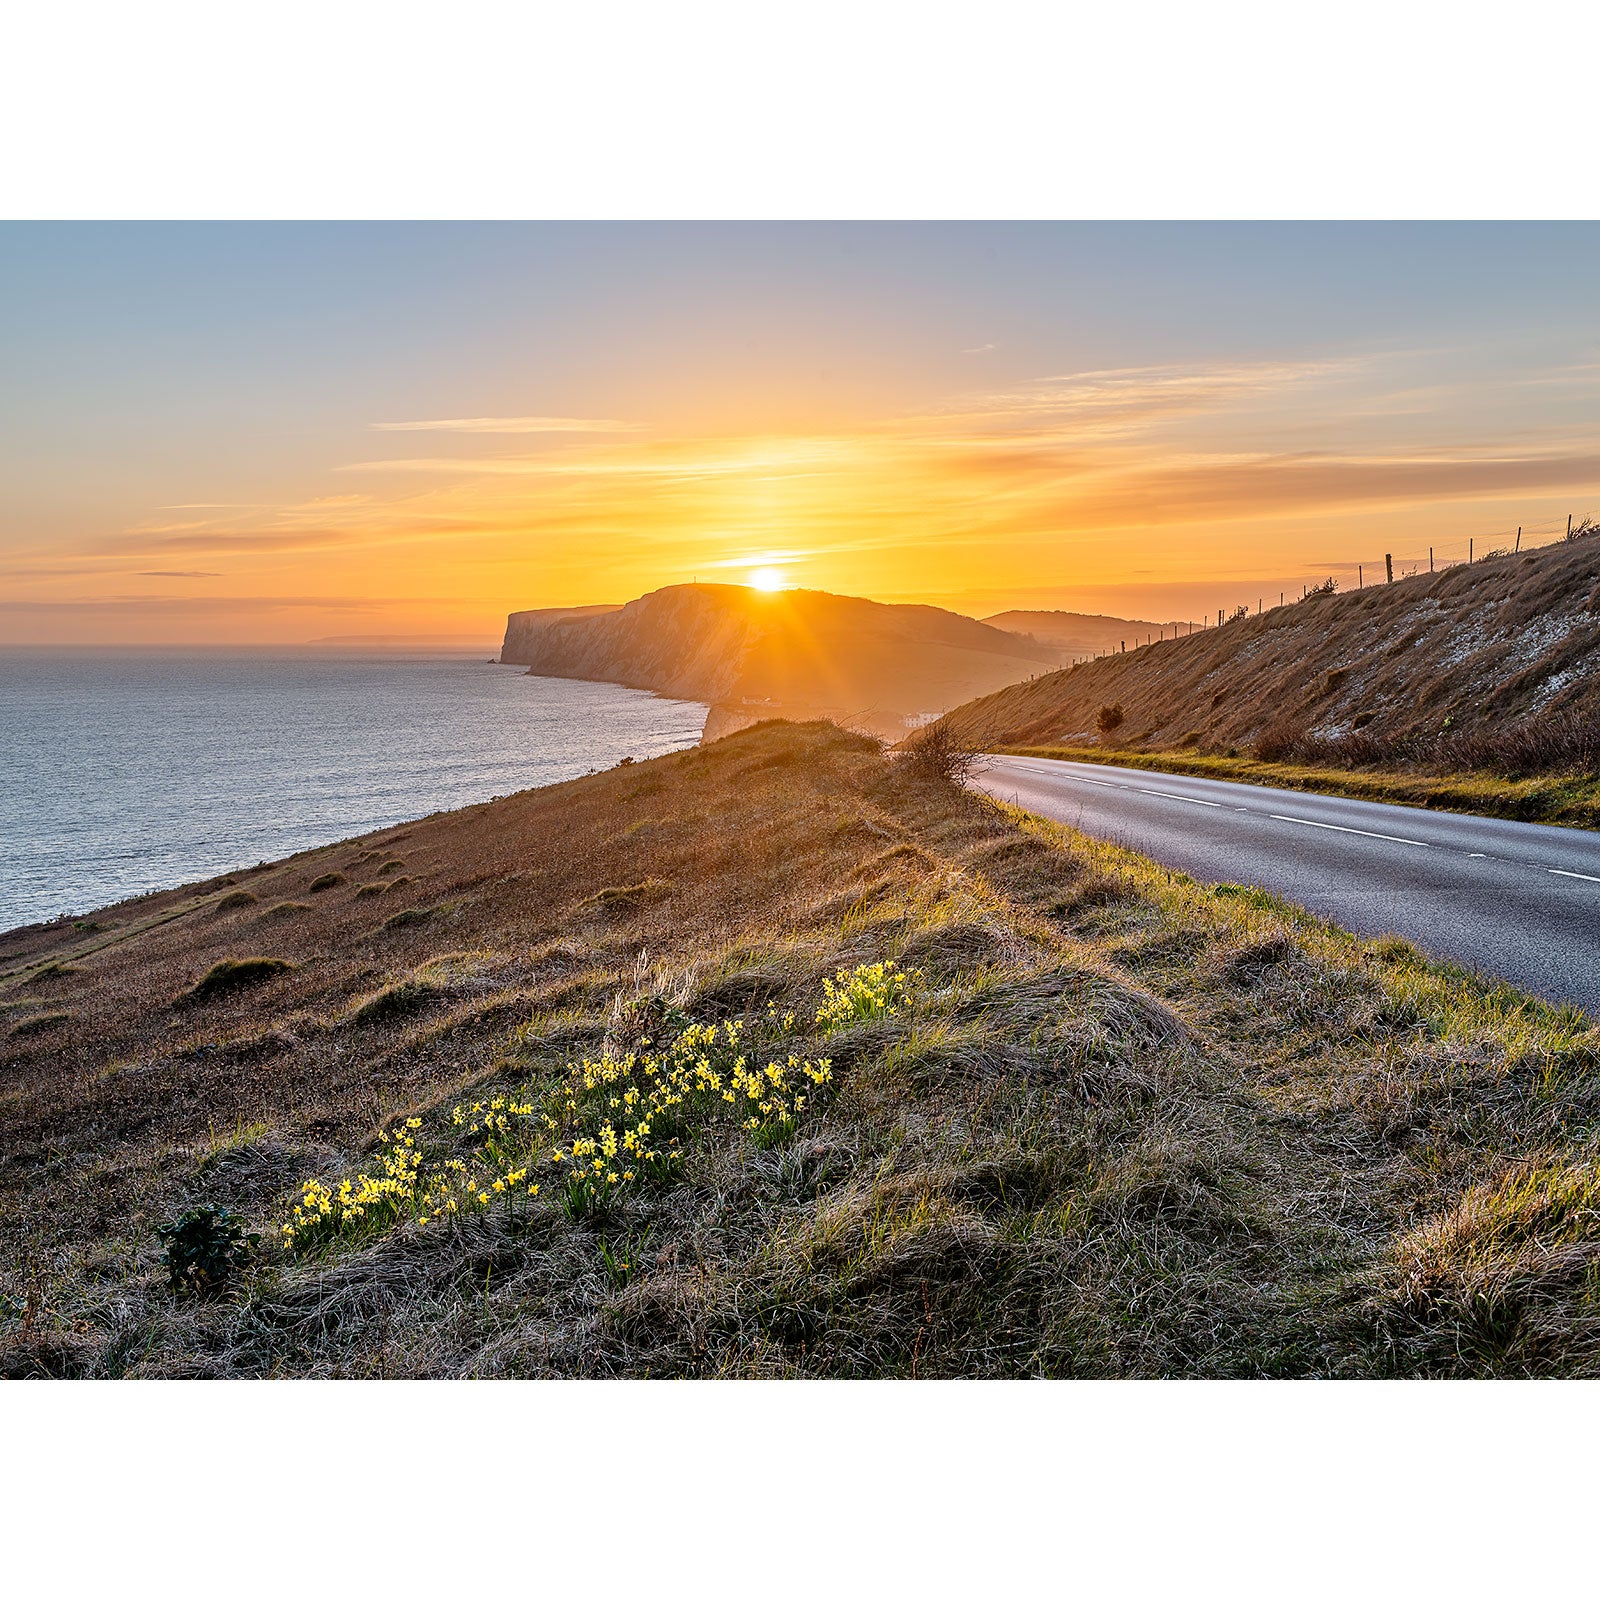 Sunset over a coastal road on the Isle of Wight with ocean views and flowering plants in the foreground, captured by Springtime at Freshwater photography by Available Light Photography.